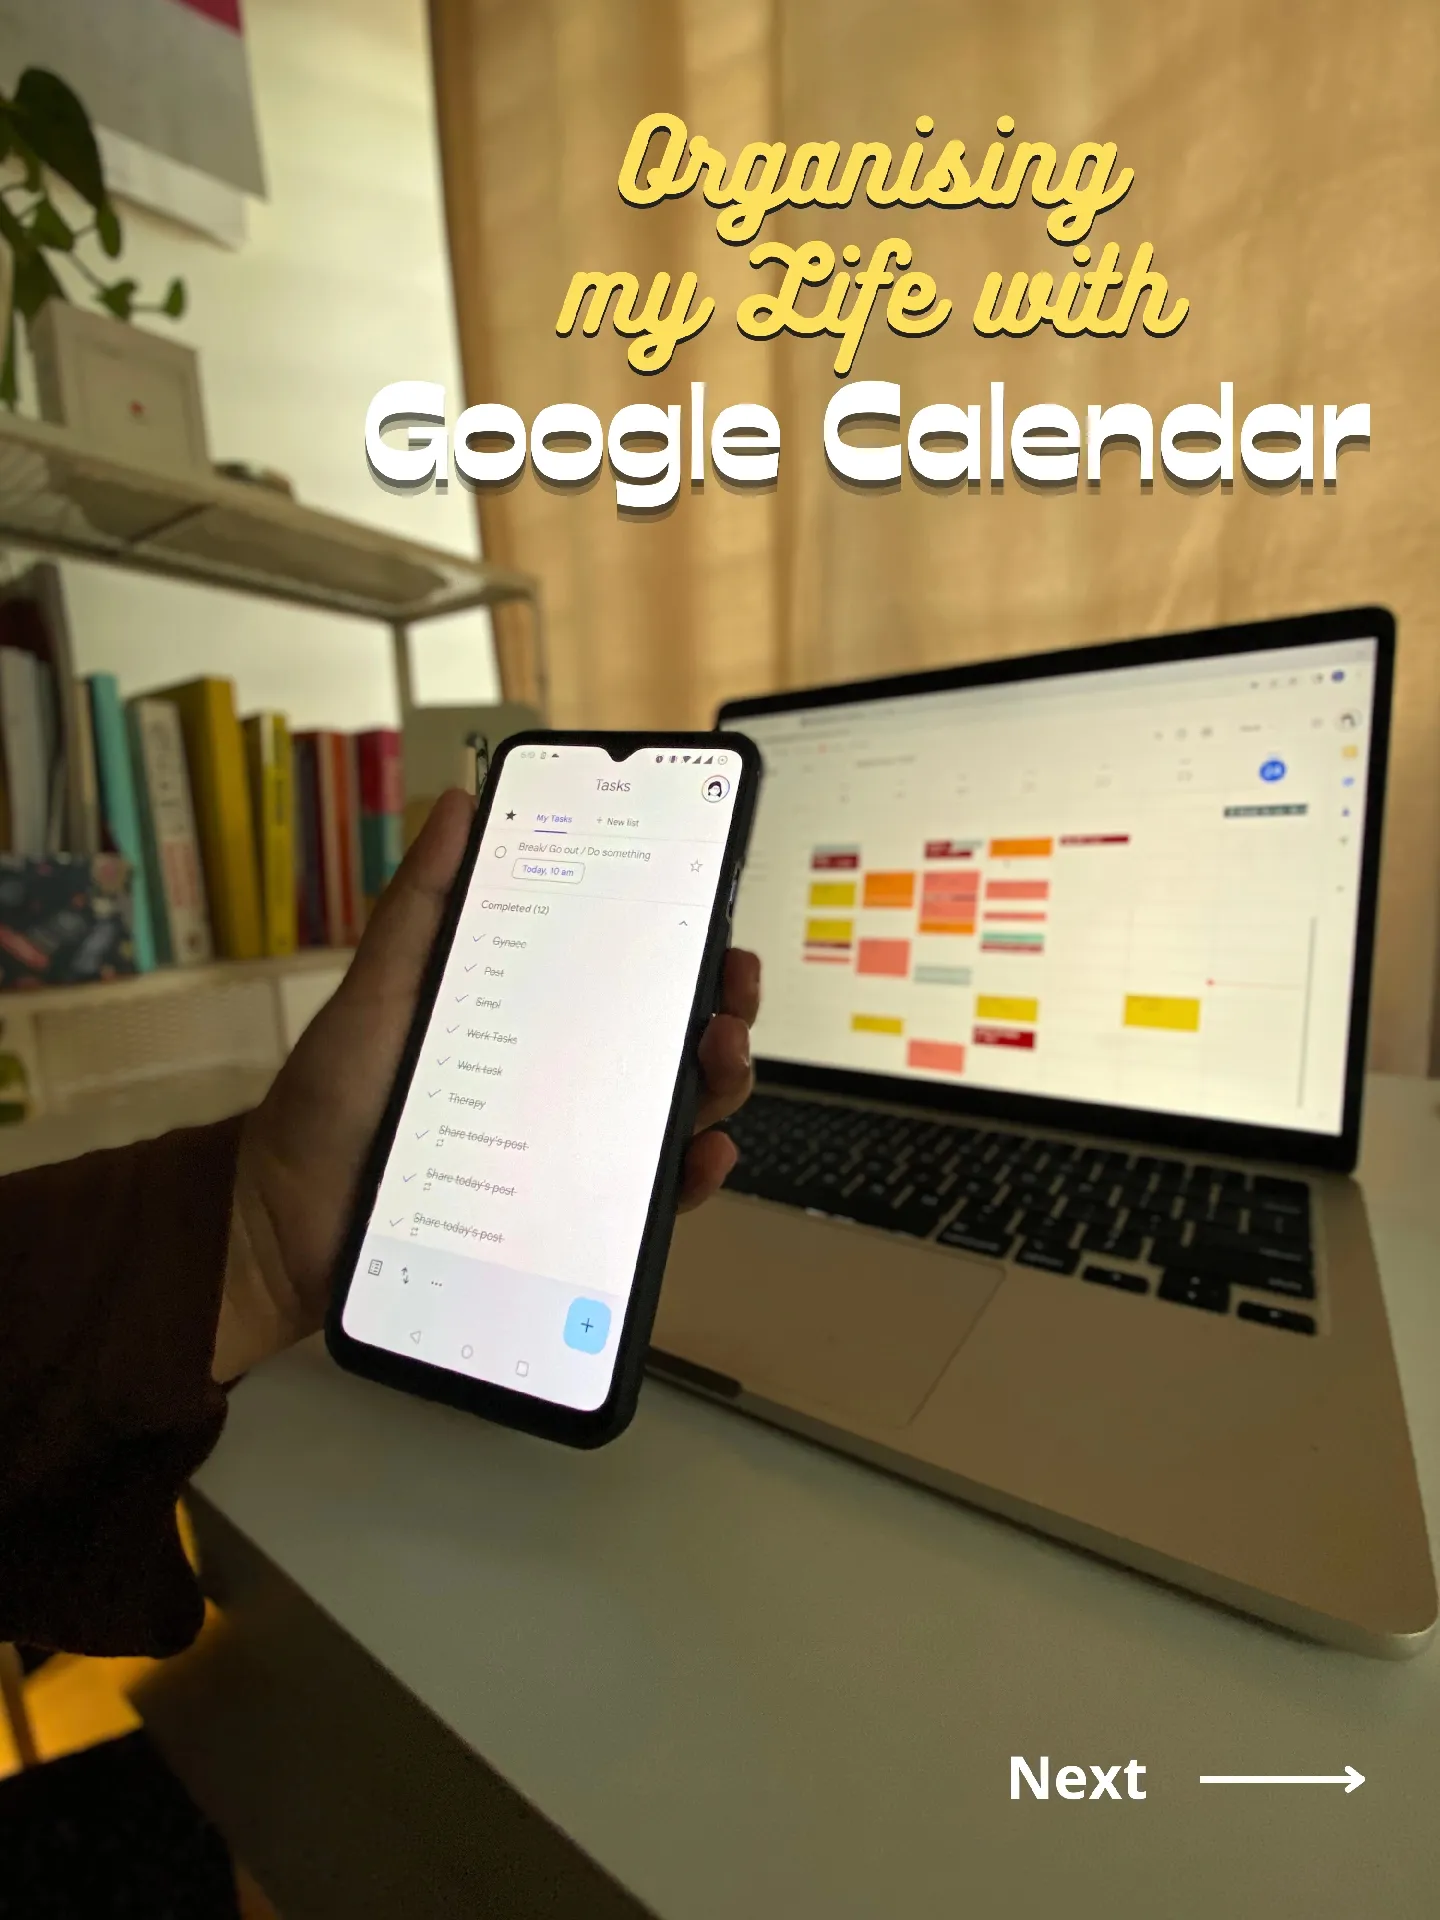 Organising my Life with Google Calendar's images